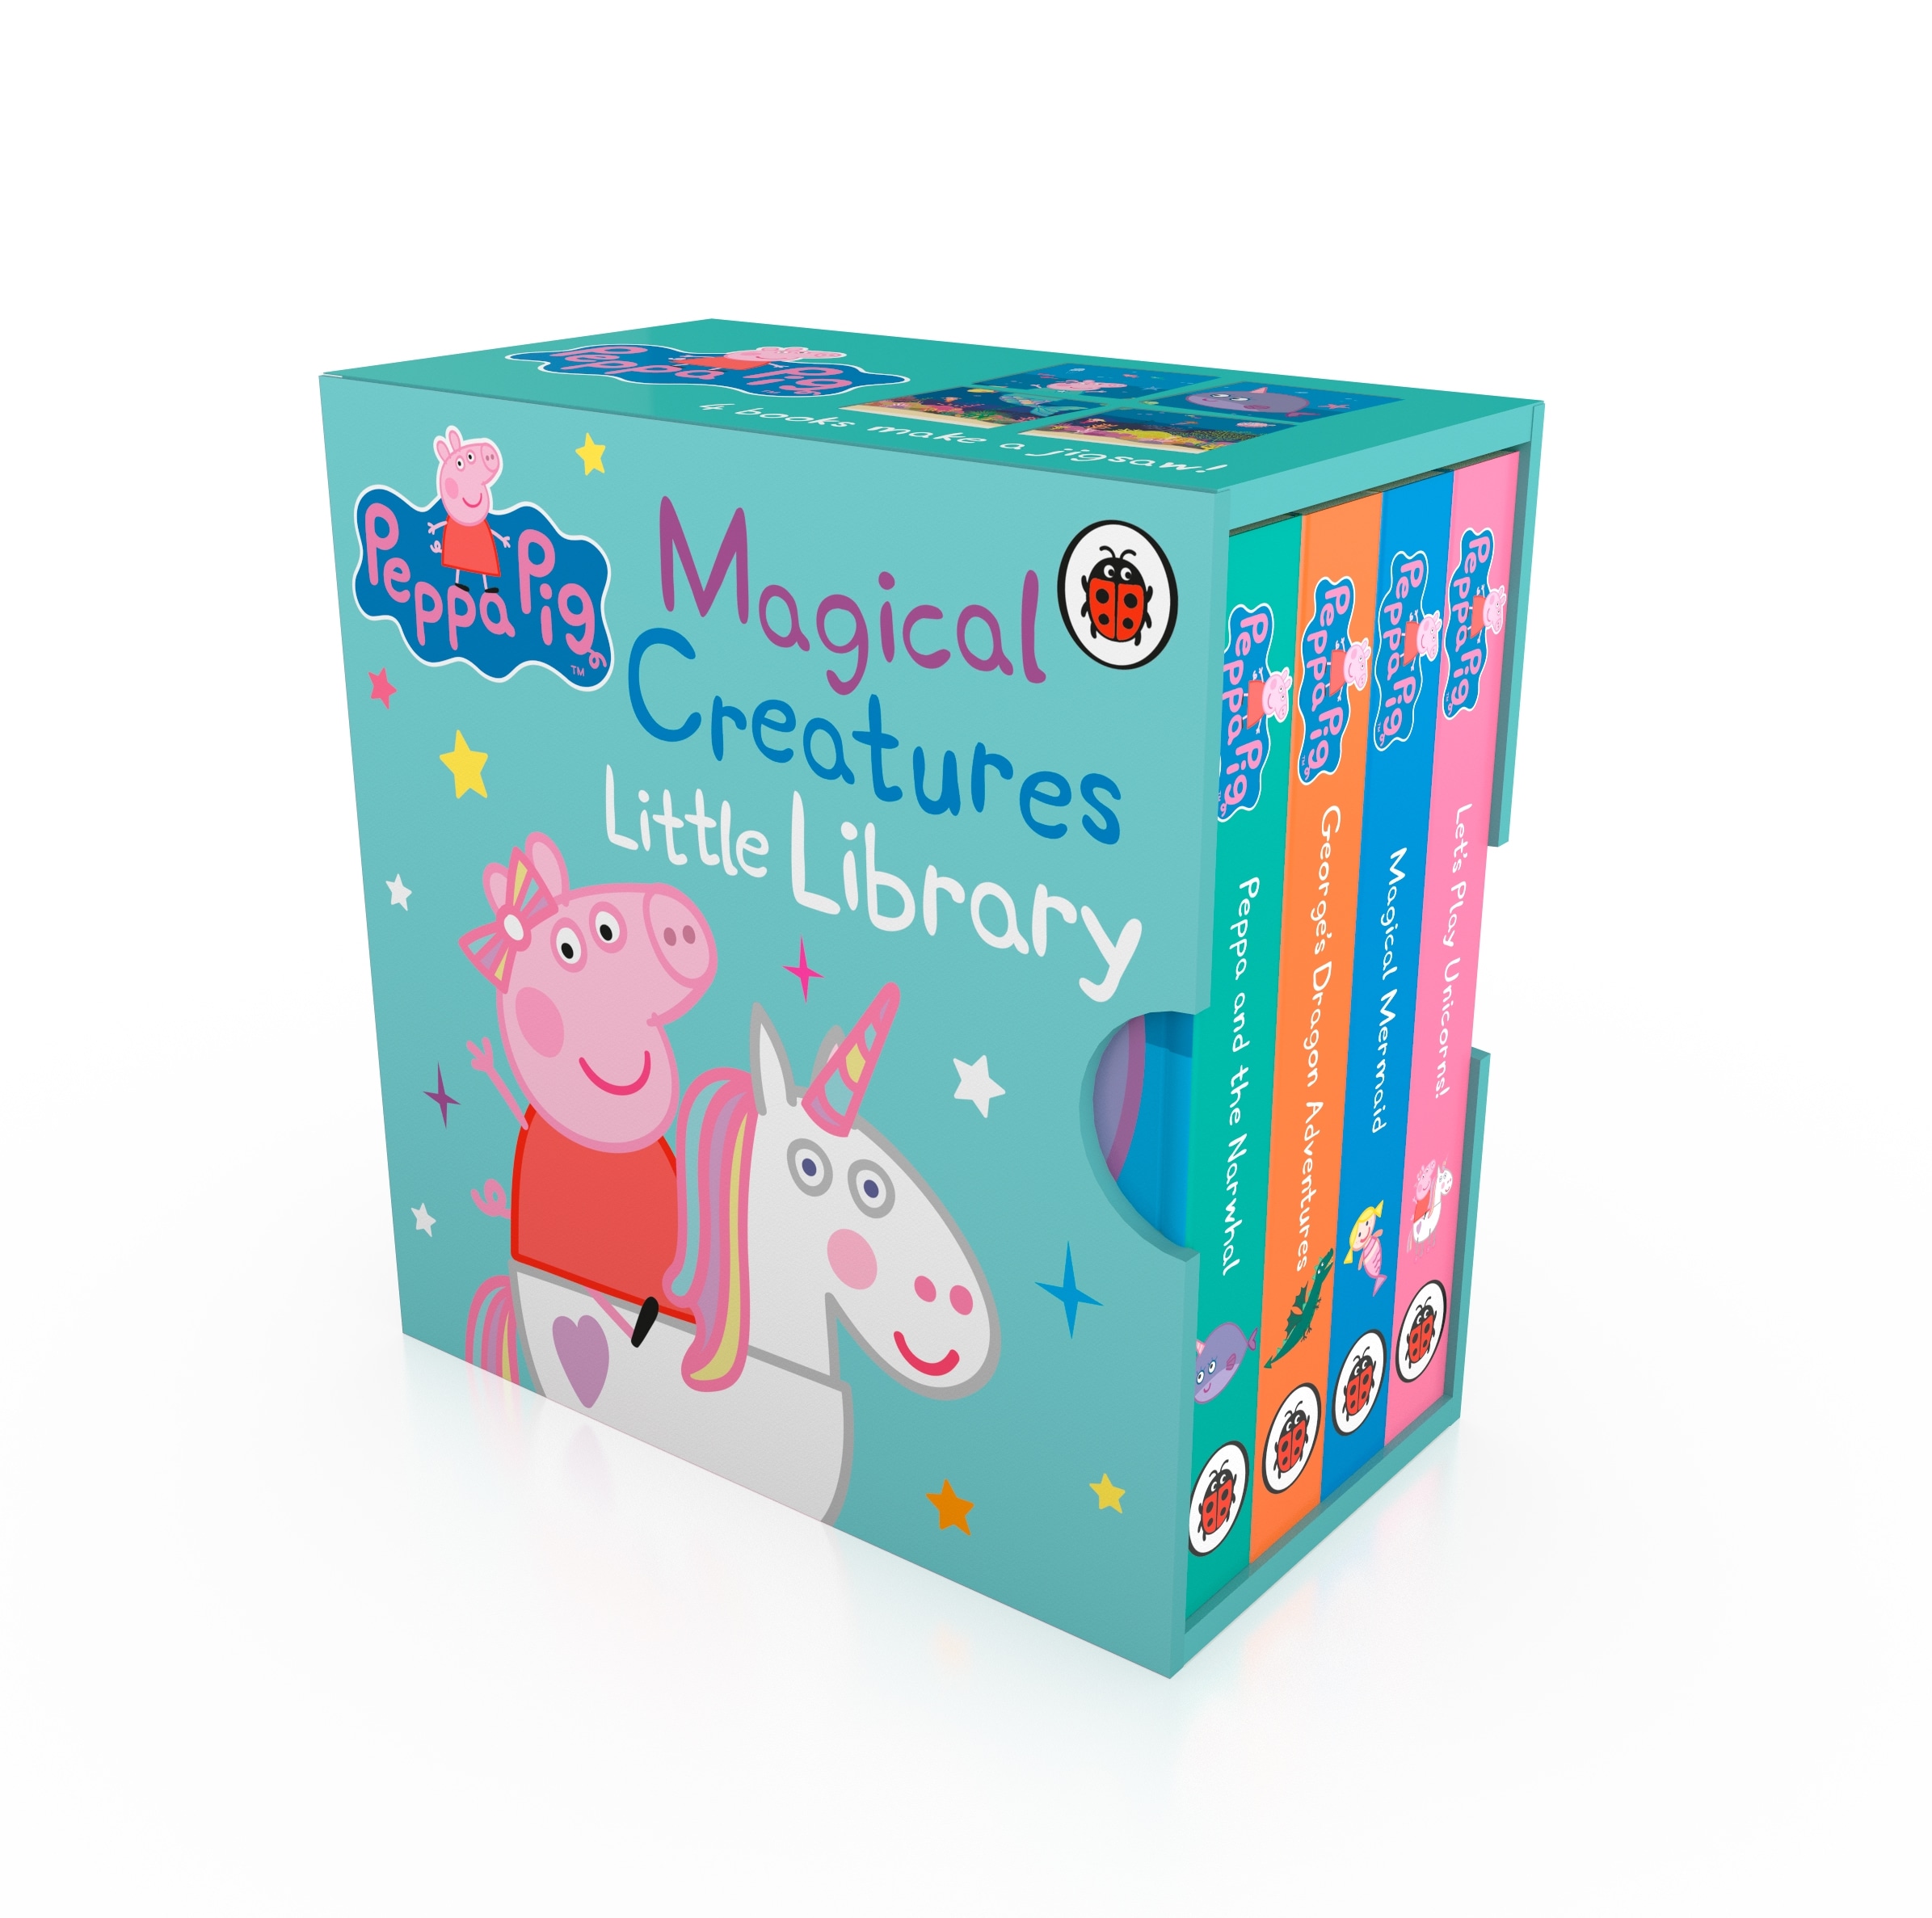 Book “Peppa's Magical Creatures Little Library” by Peppa Pig — September 30, 2021